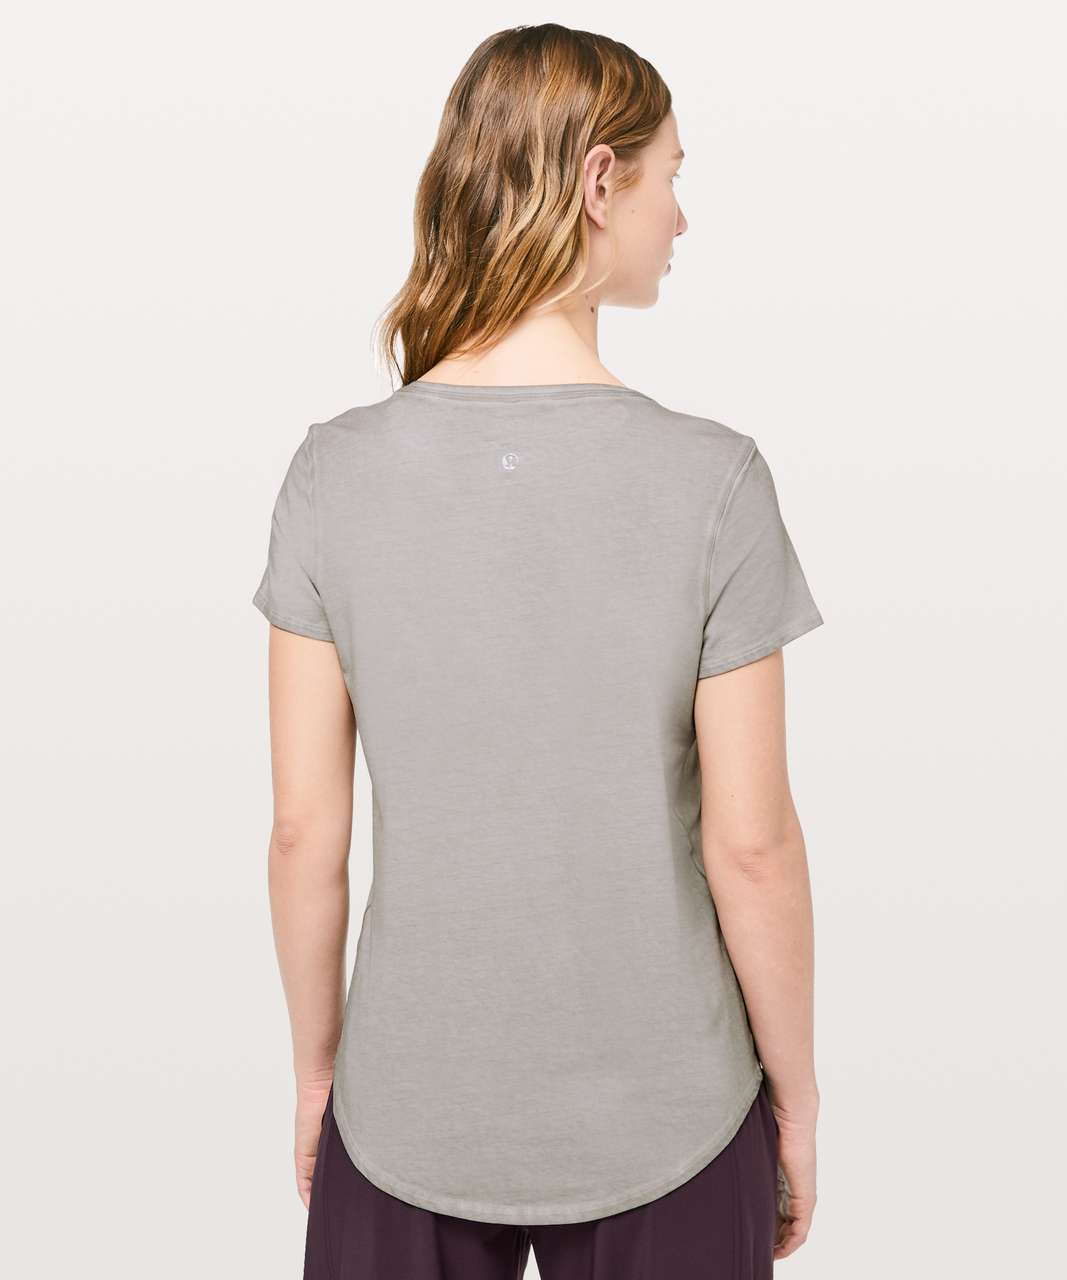 Lululemon Love Crew *Fade - Washed French Clay